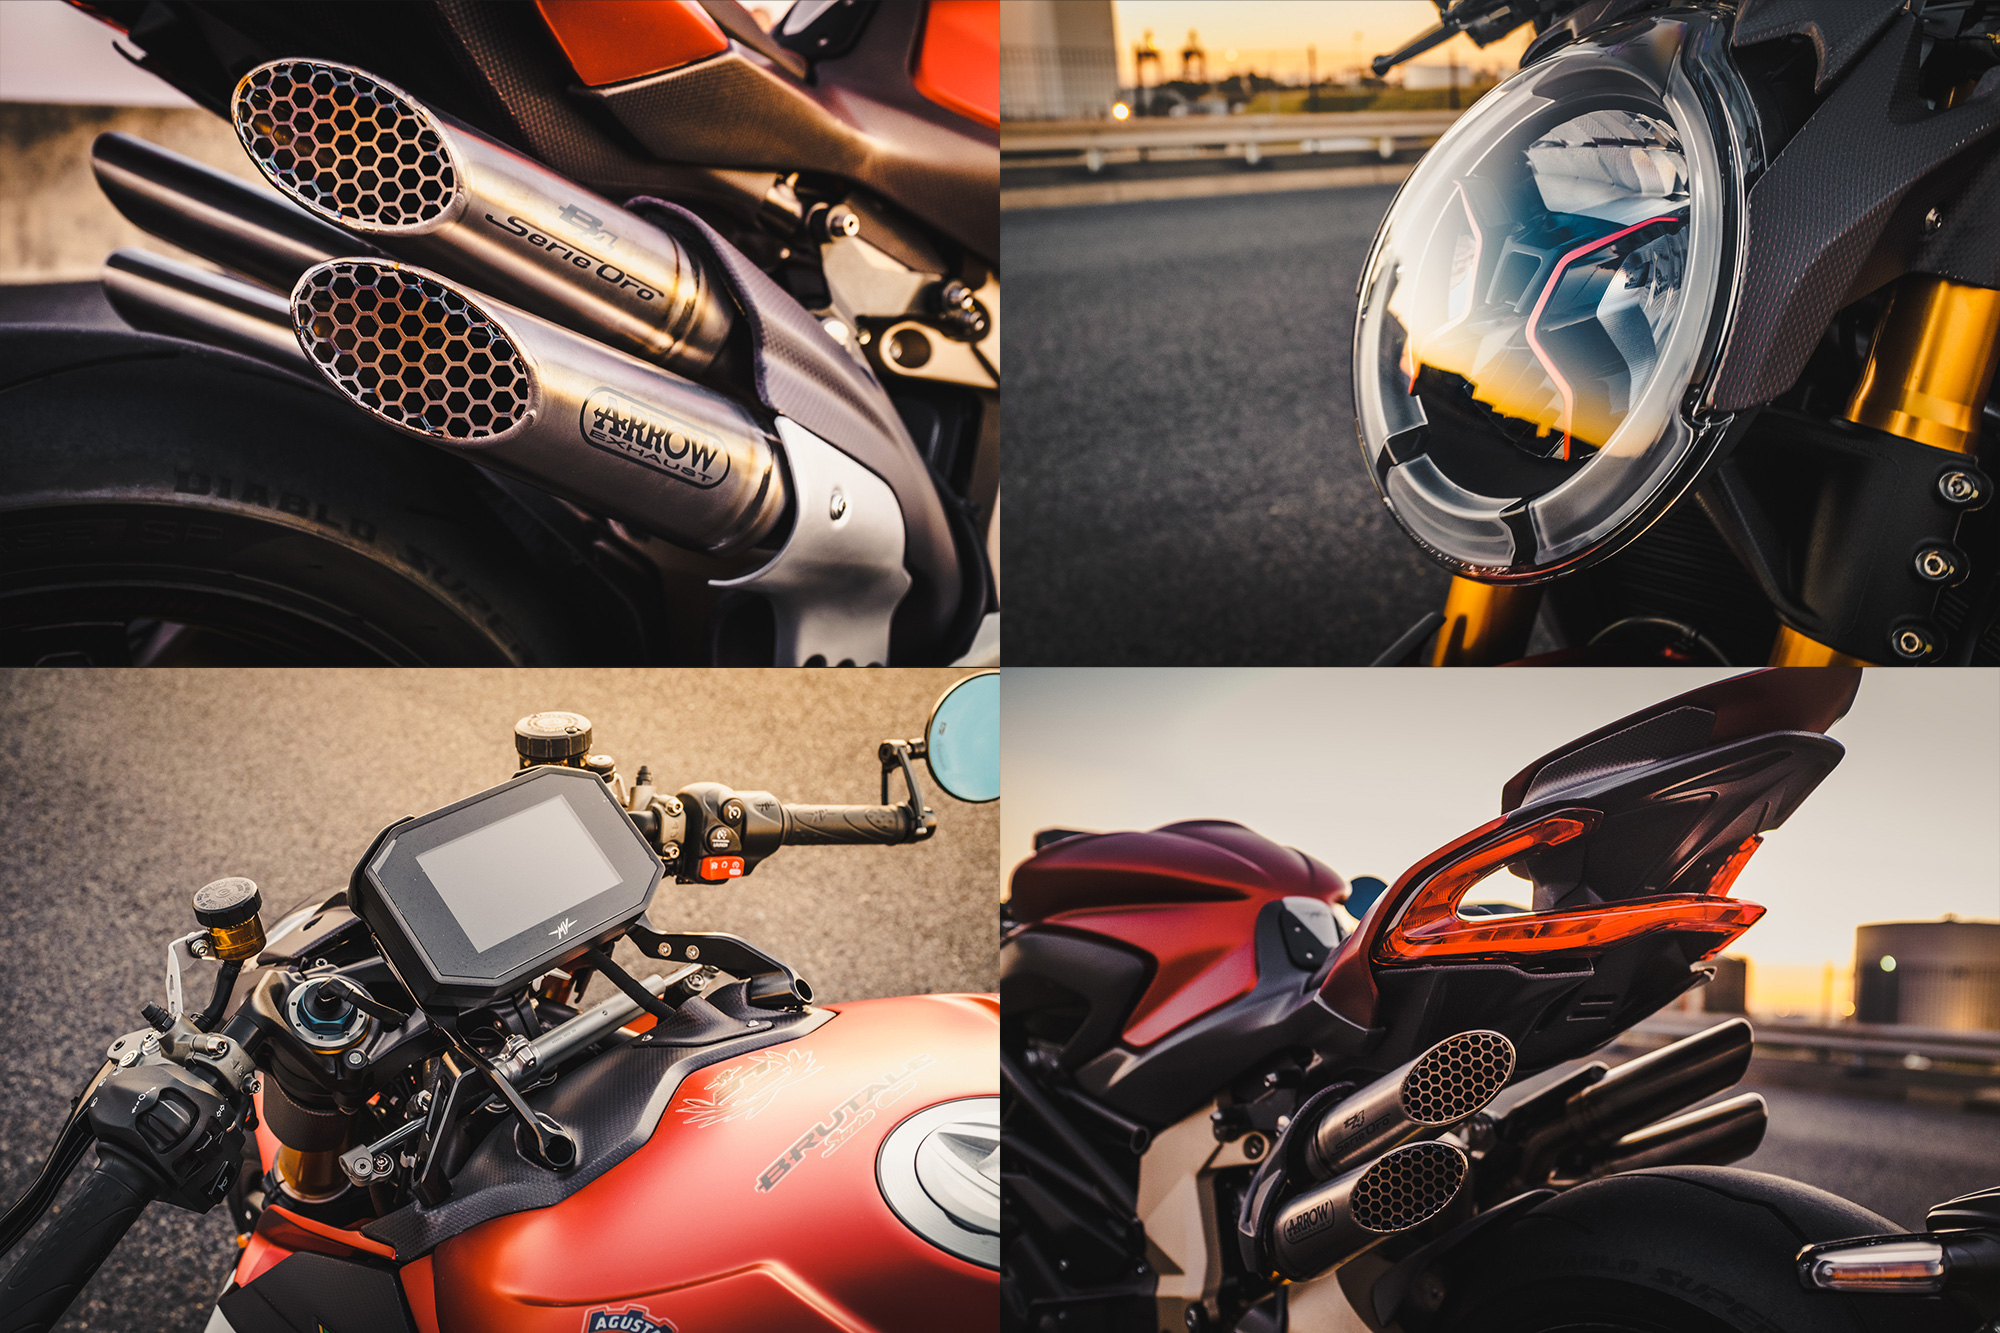 collage of MV Agusta Brutale motorcycle photos on an industrial road at sunset